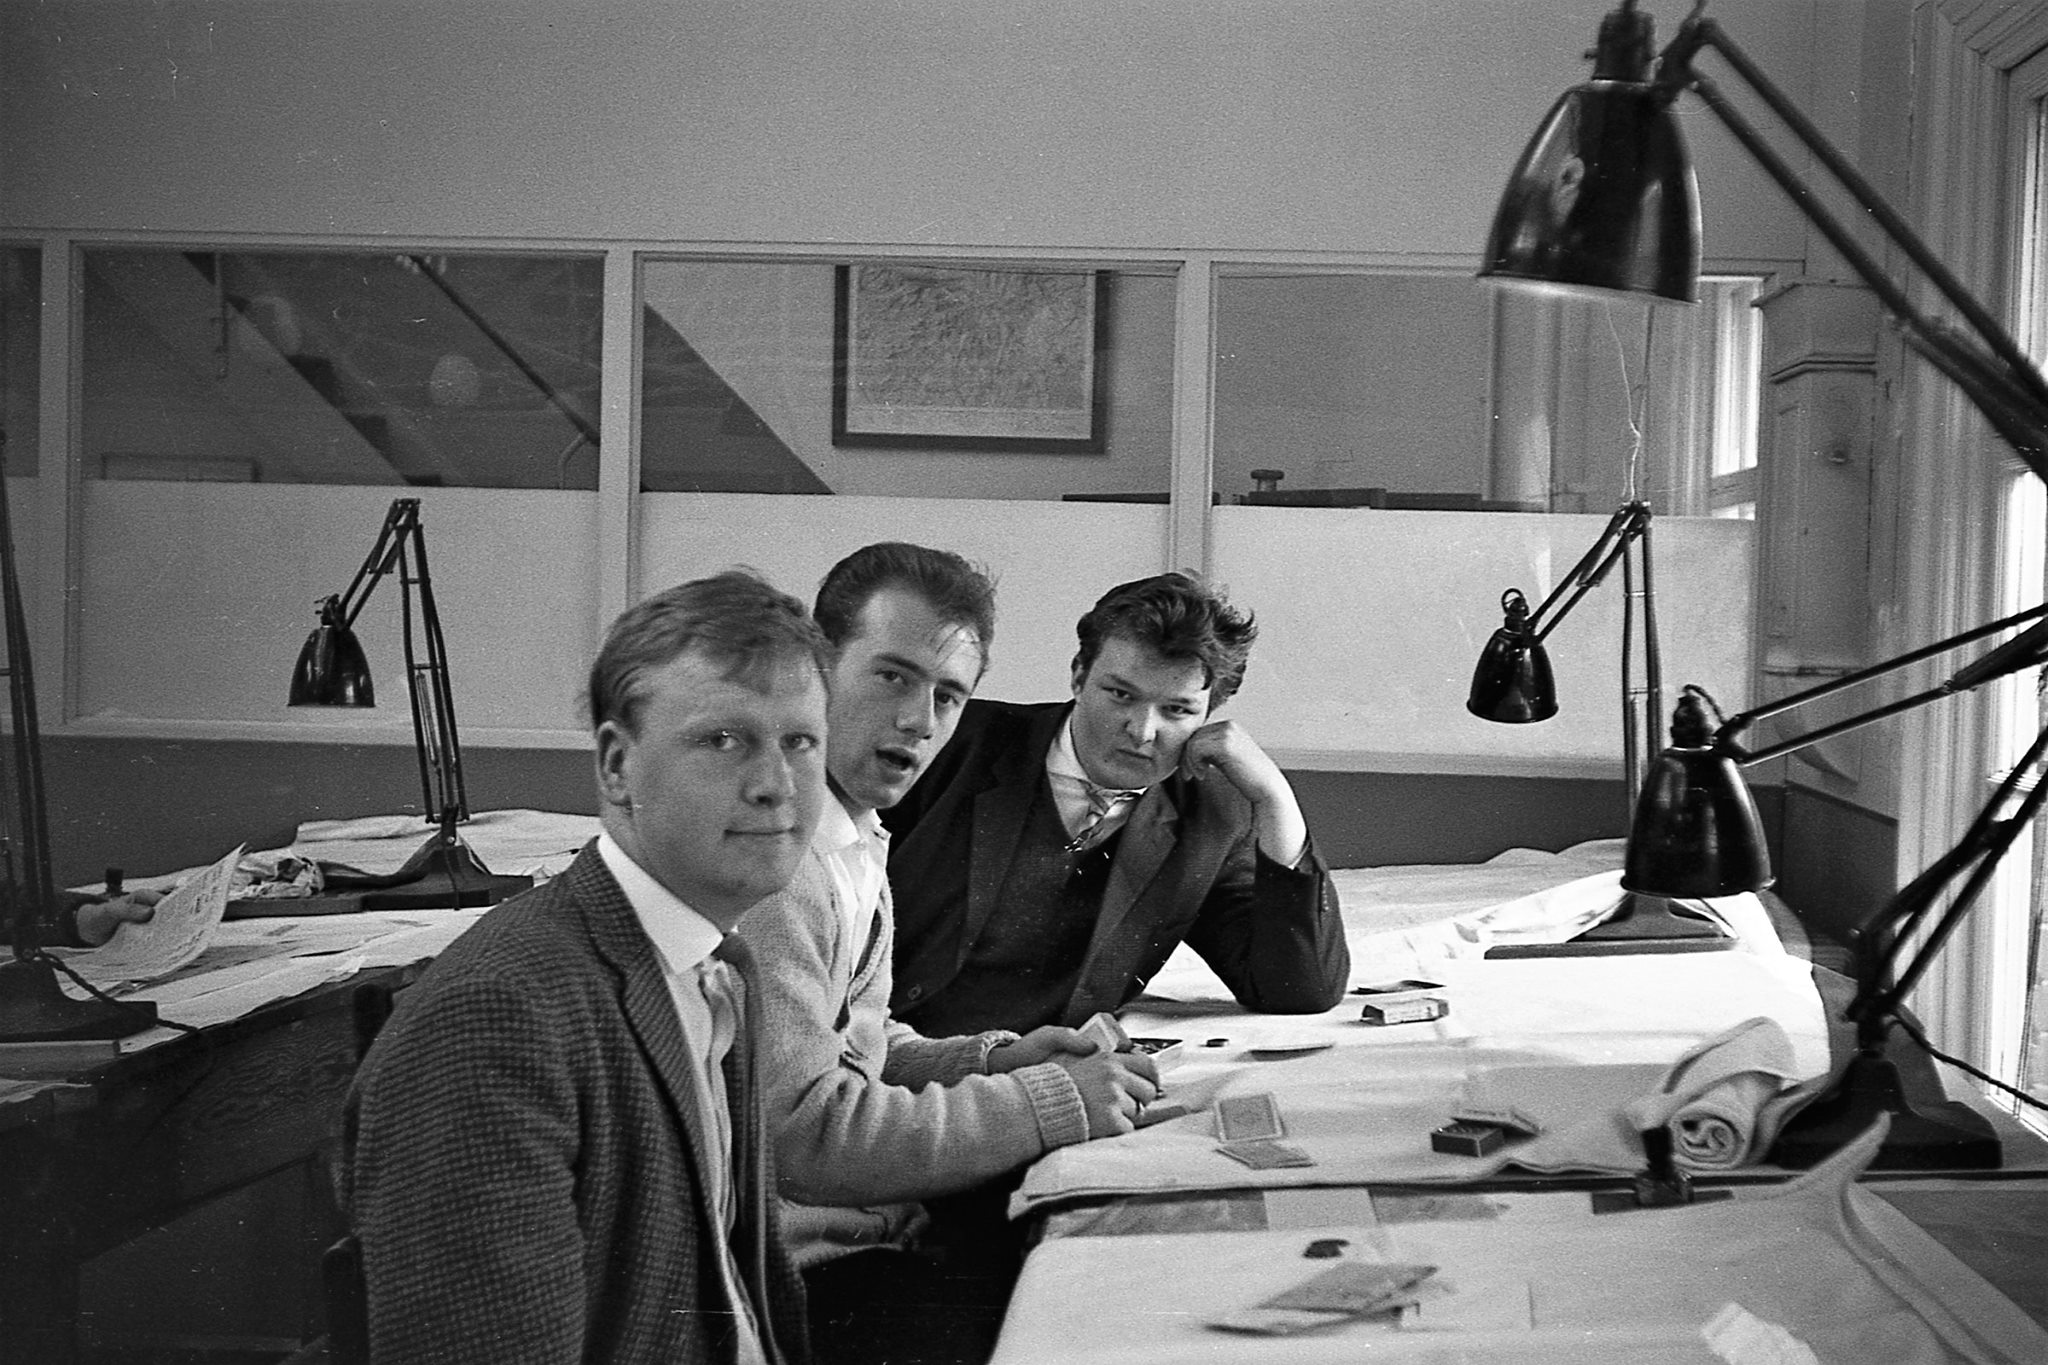 London Road Drawing School at lunchtime in 1961